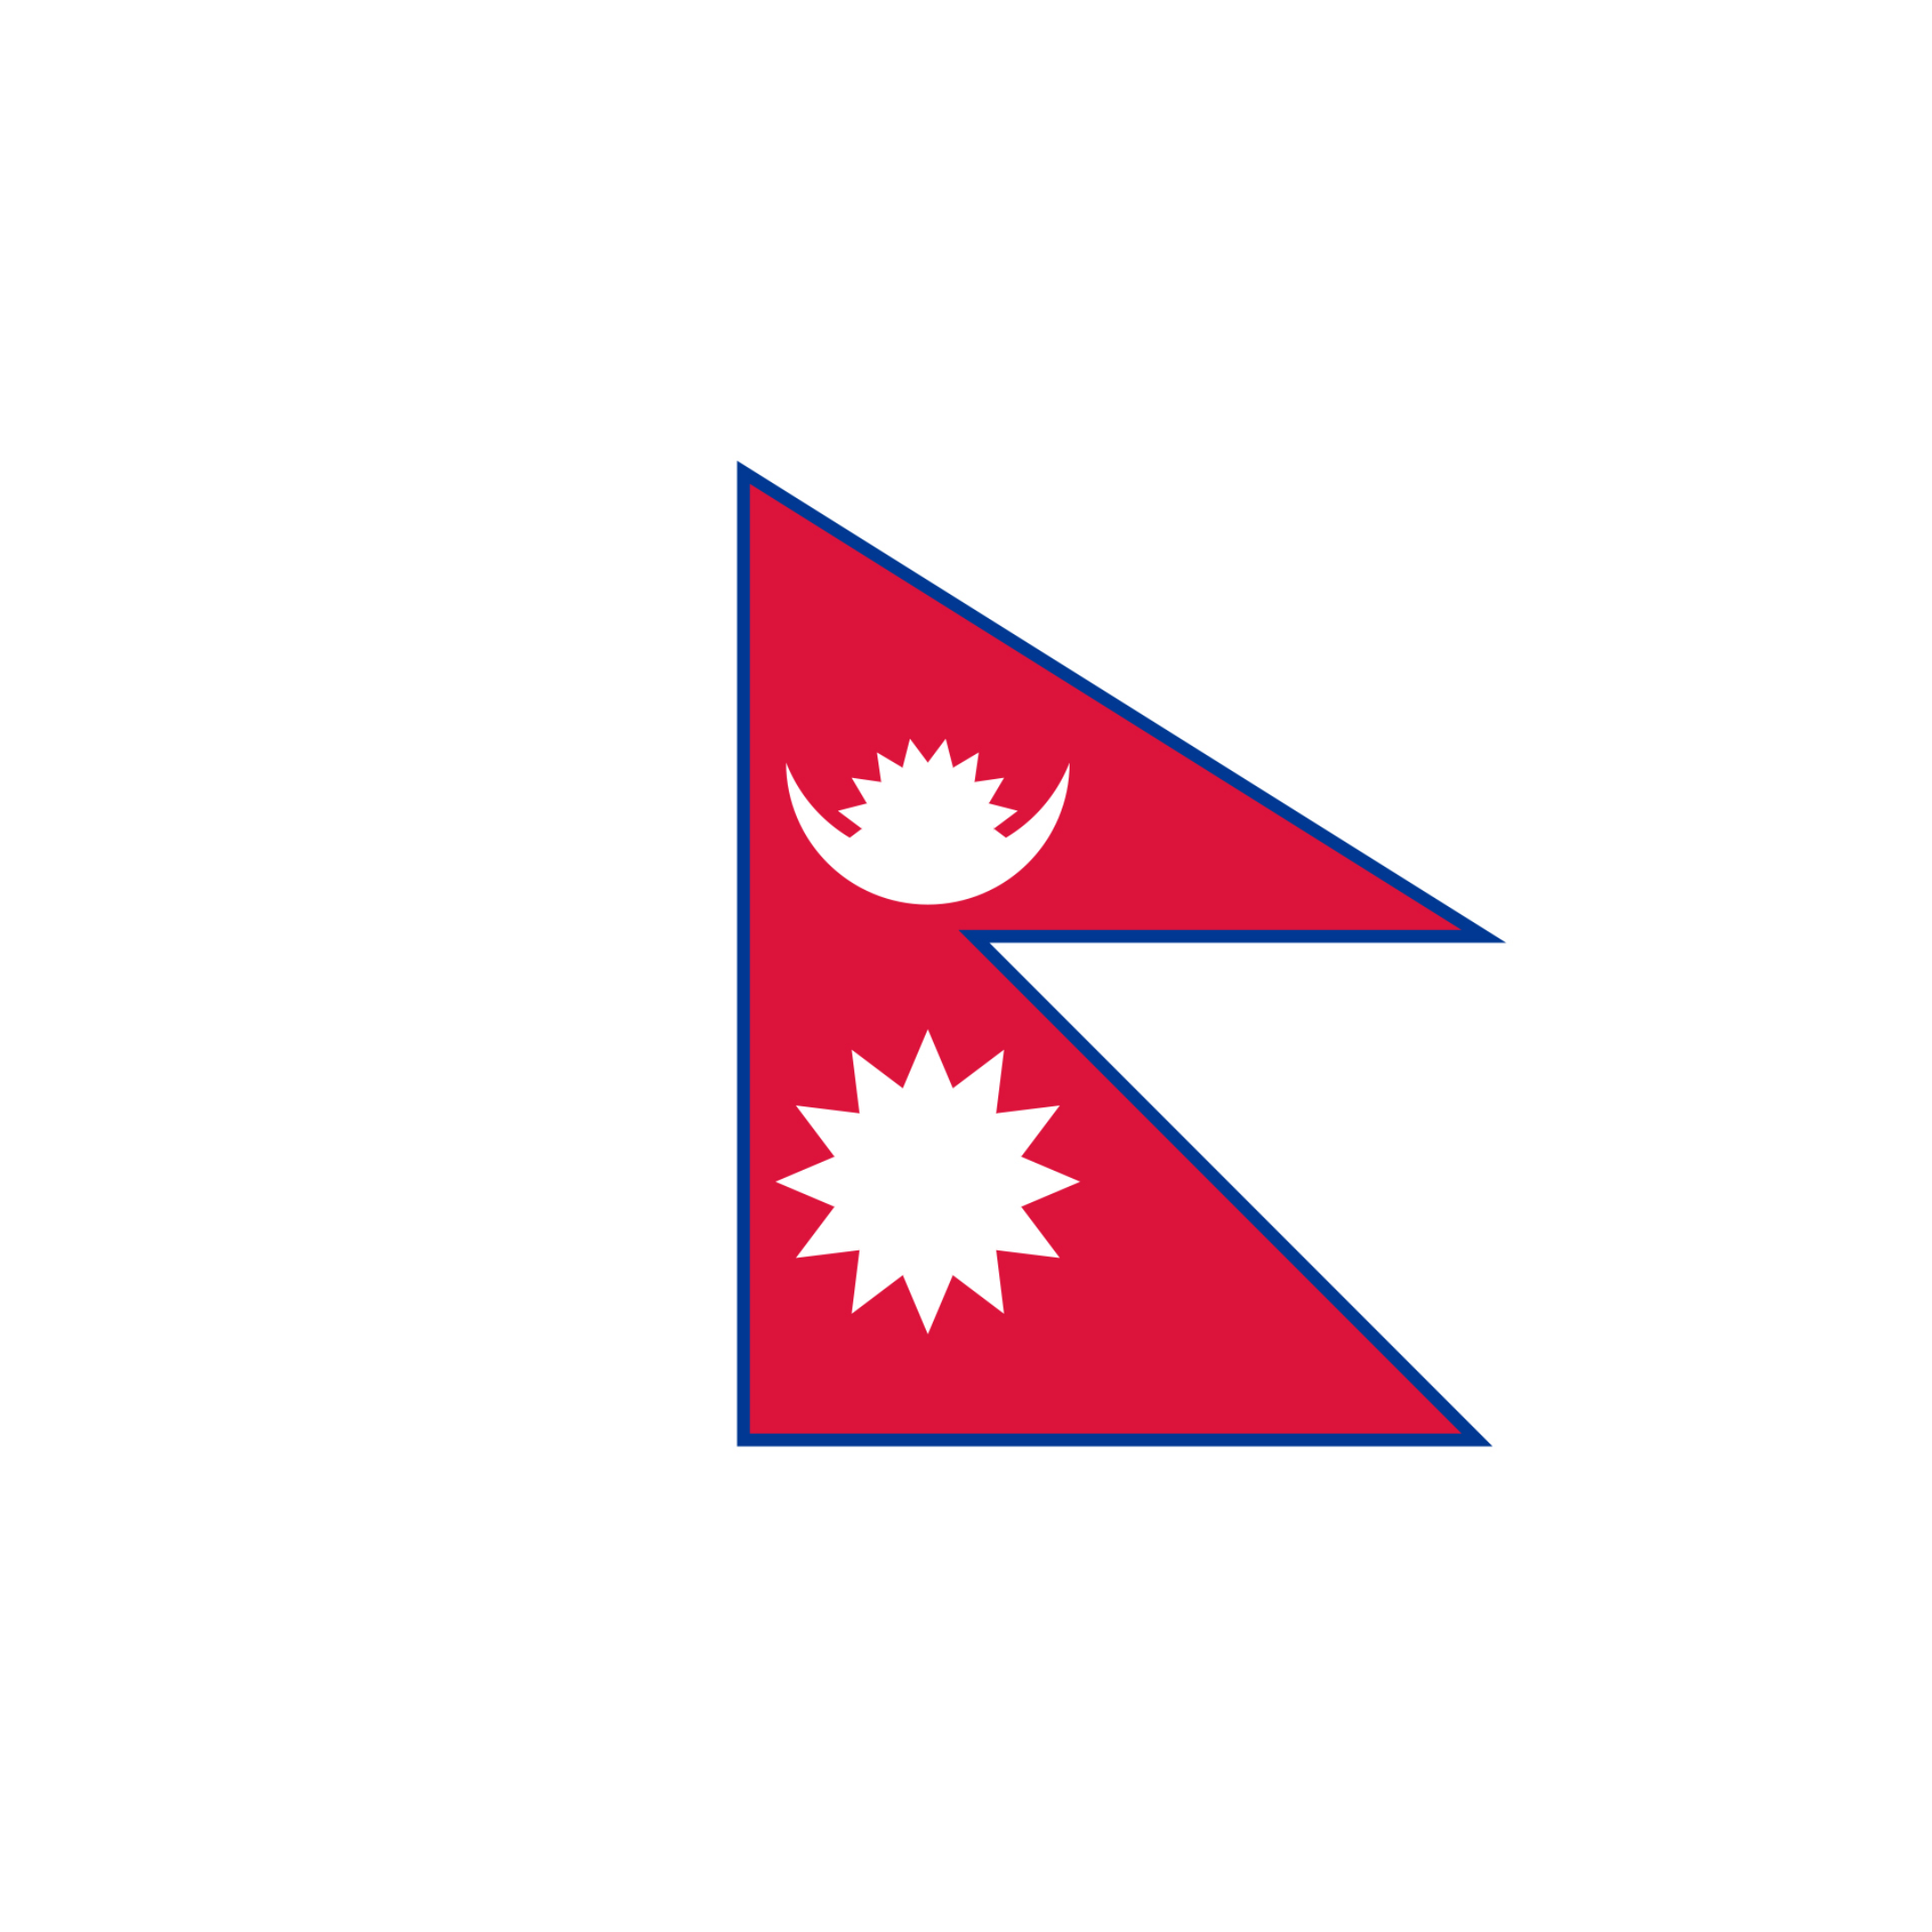 The flag of Nepal is made up of 2 red triangles (pennants) one above the other, with a blue border, 2 white suns and a moon.